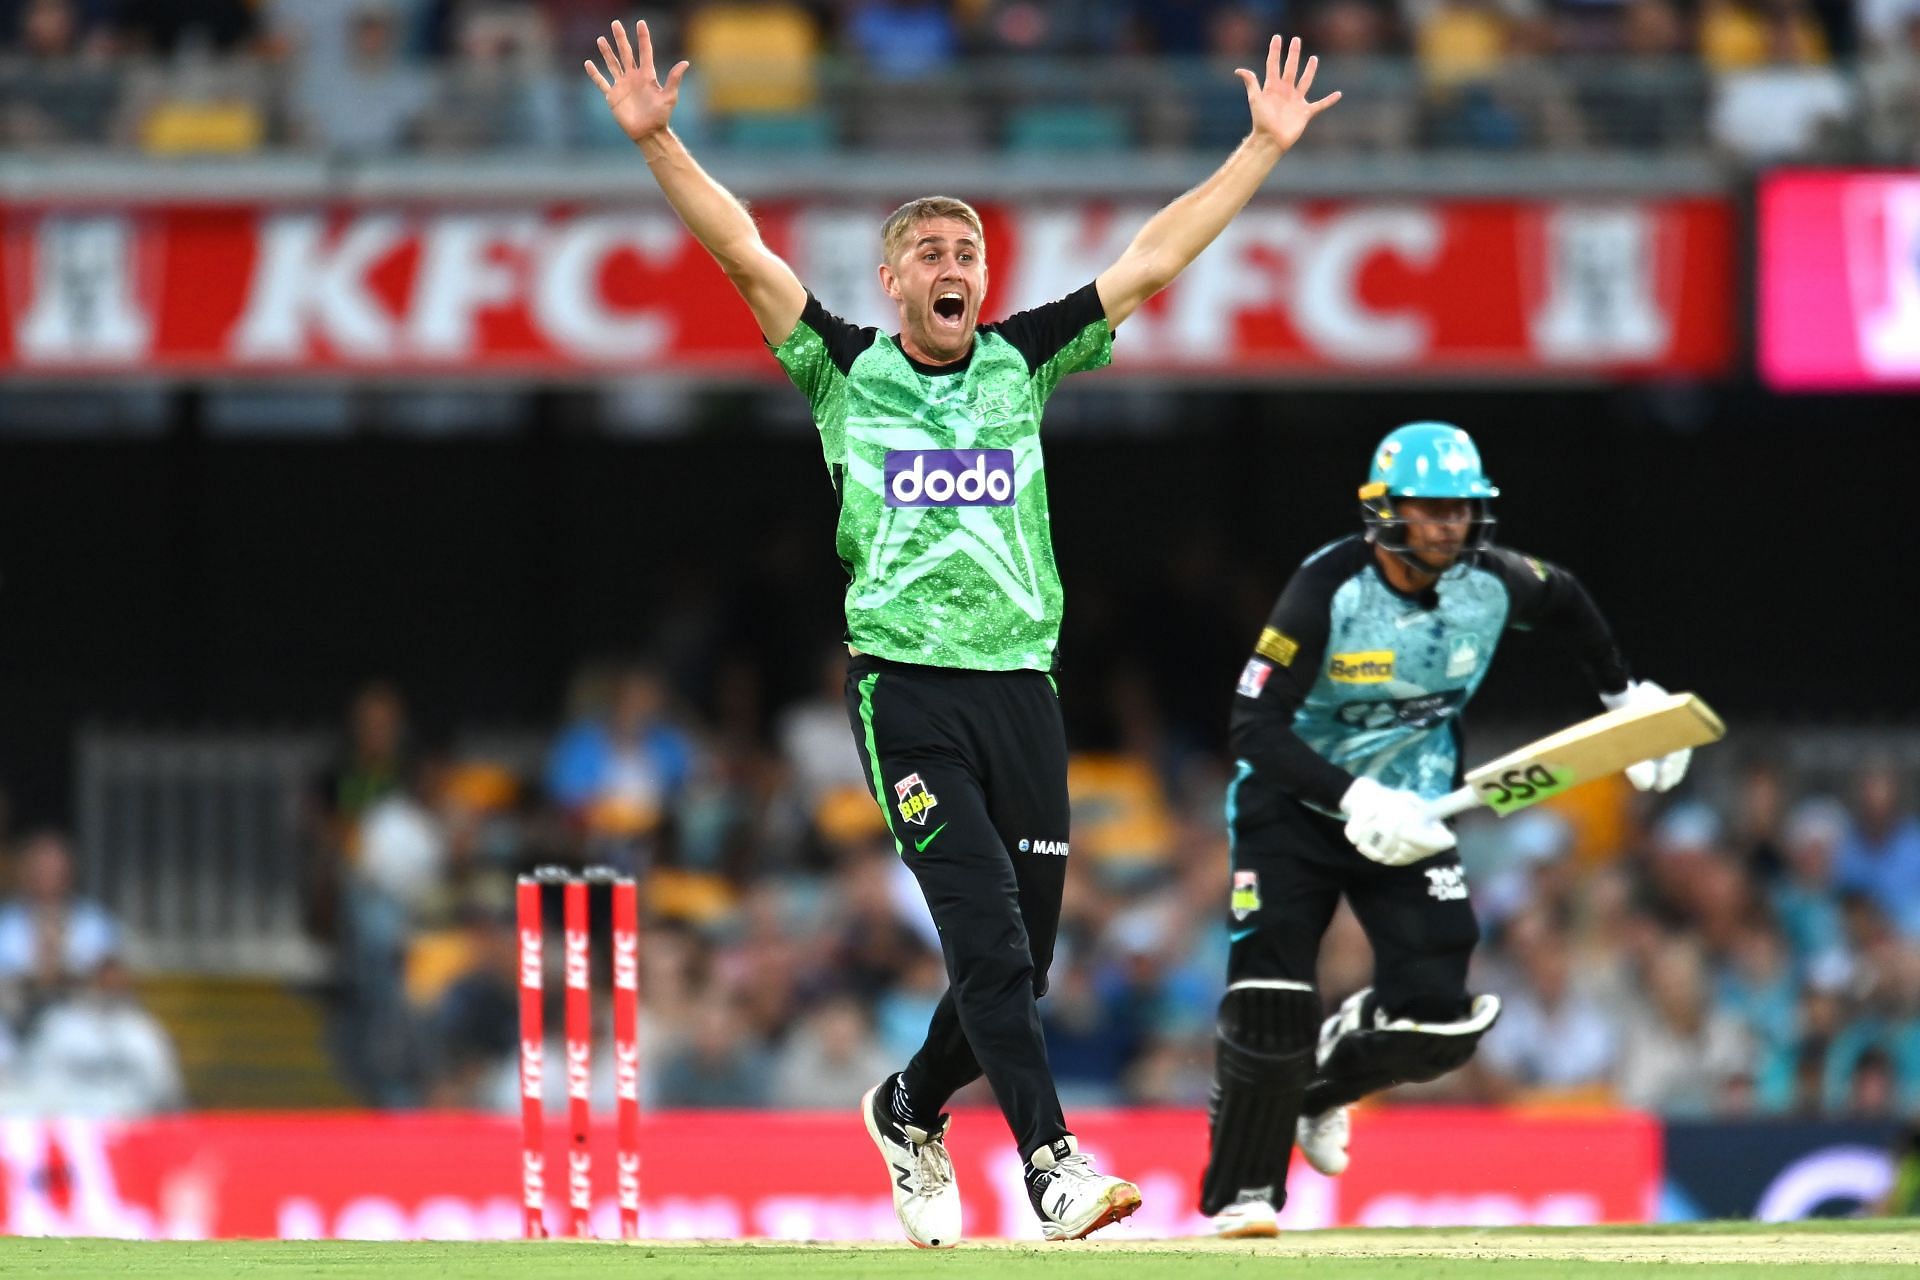 Olly Stone featuring in the BBL (Pic: Getty Images)